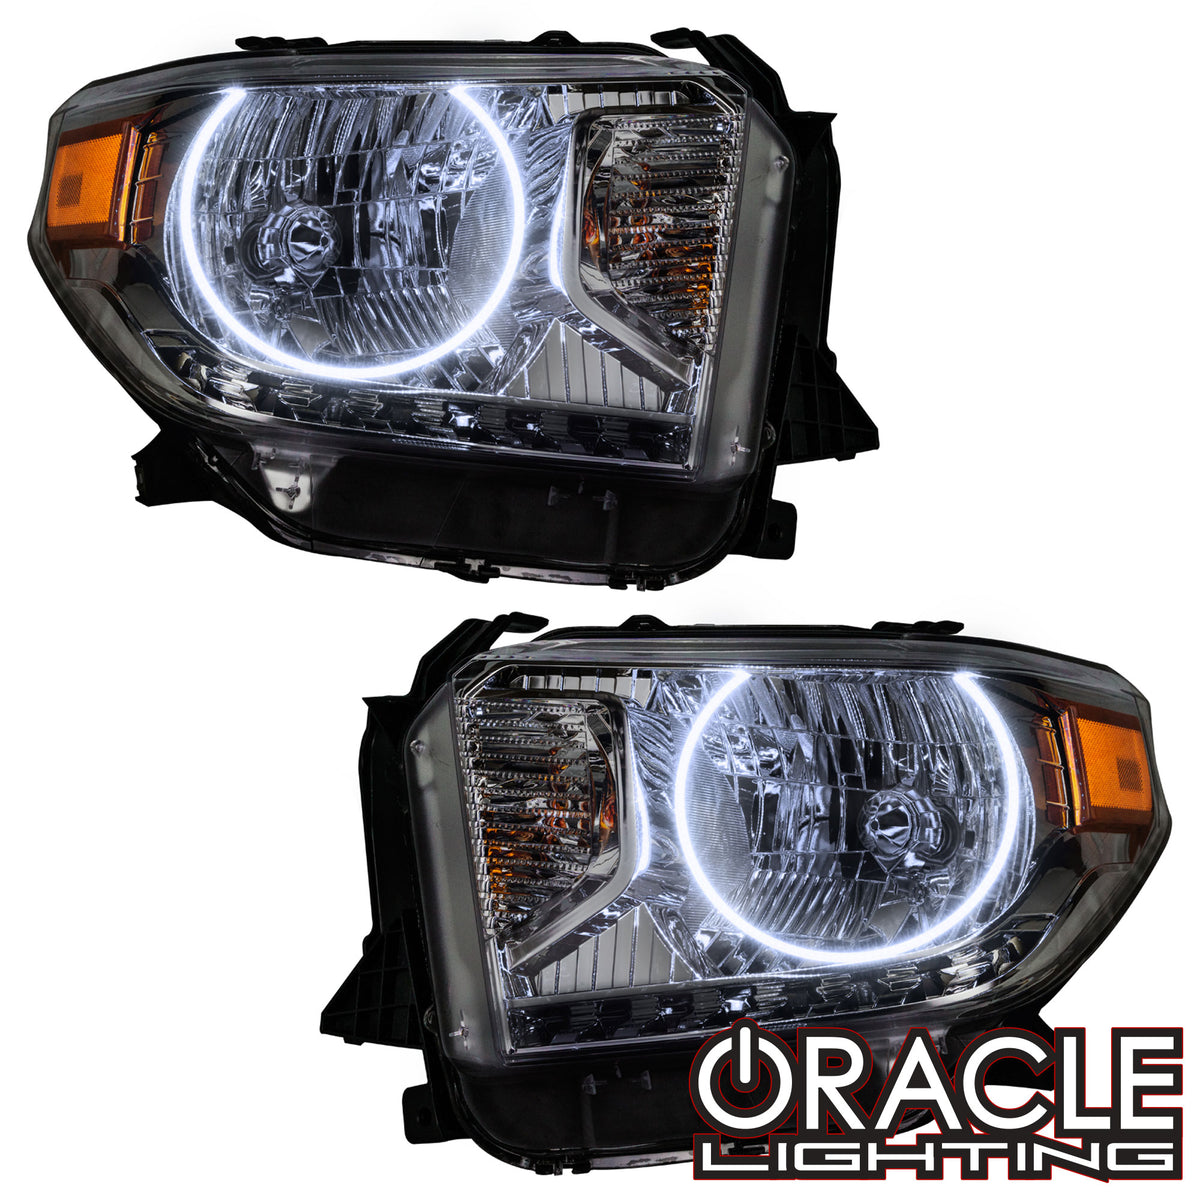 2014-2017 Toyota Tundra Pre-Assembled Halo Headlights | ORACLE